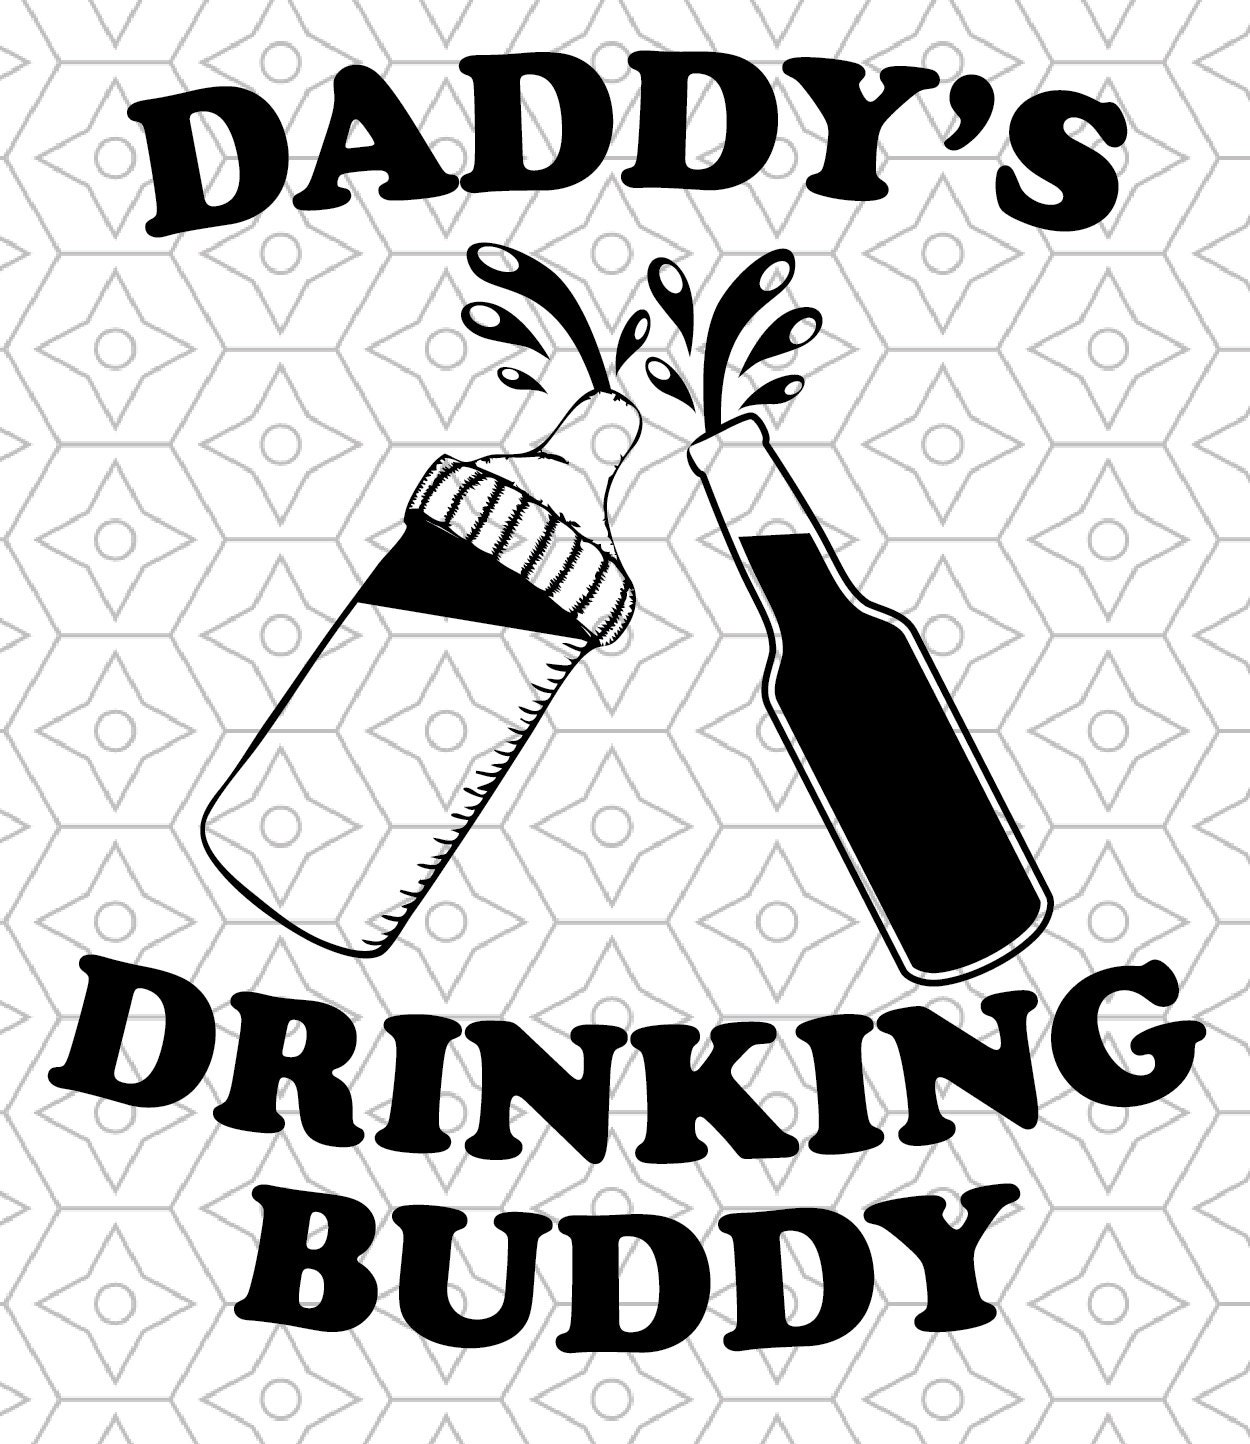 Download Daddy's Drinking Buddy Onesie Design, SVG, DXF Vector Files for use with Cricut or Silhouette ...